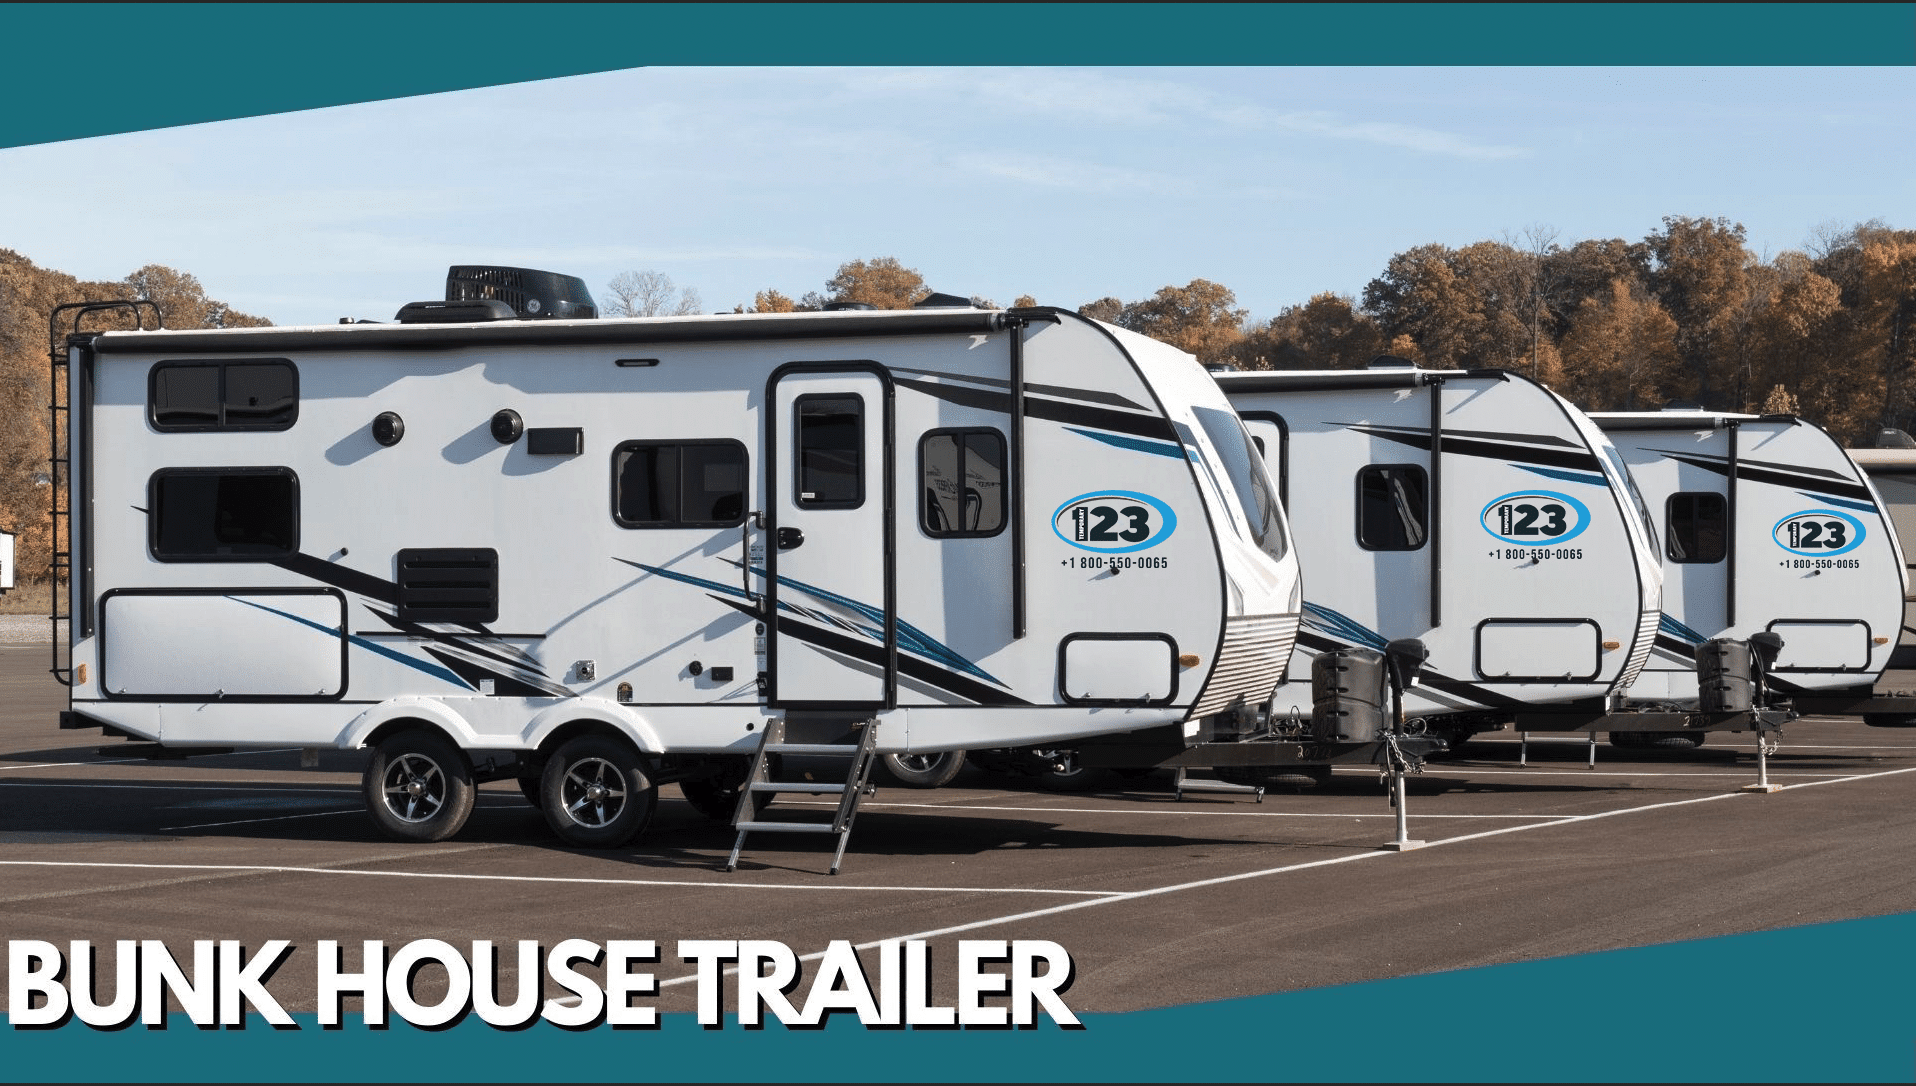 BUNK_HOUSE TRAILER_RIGHT